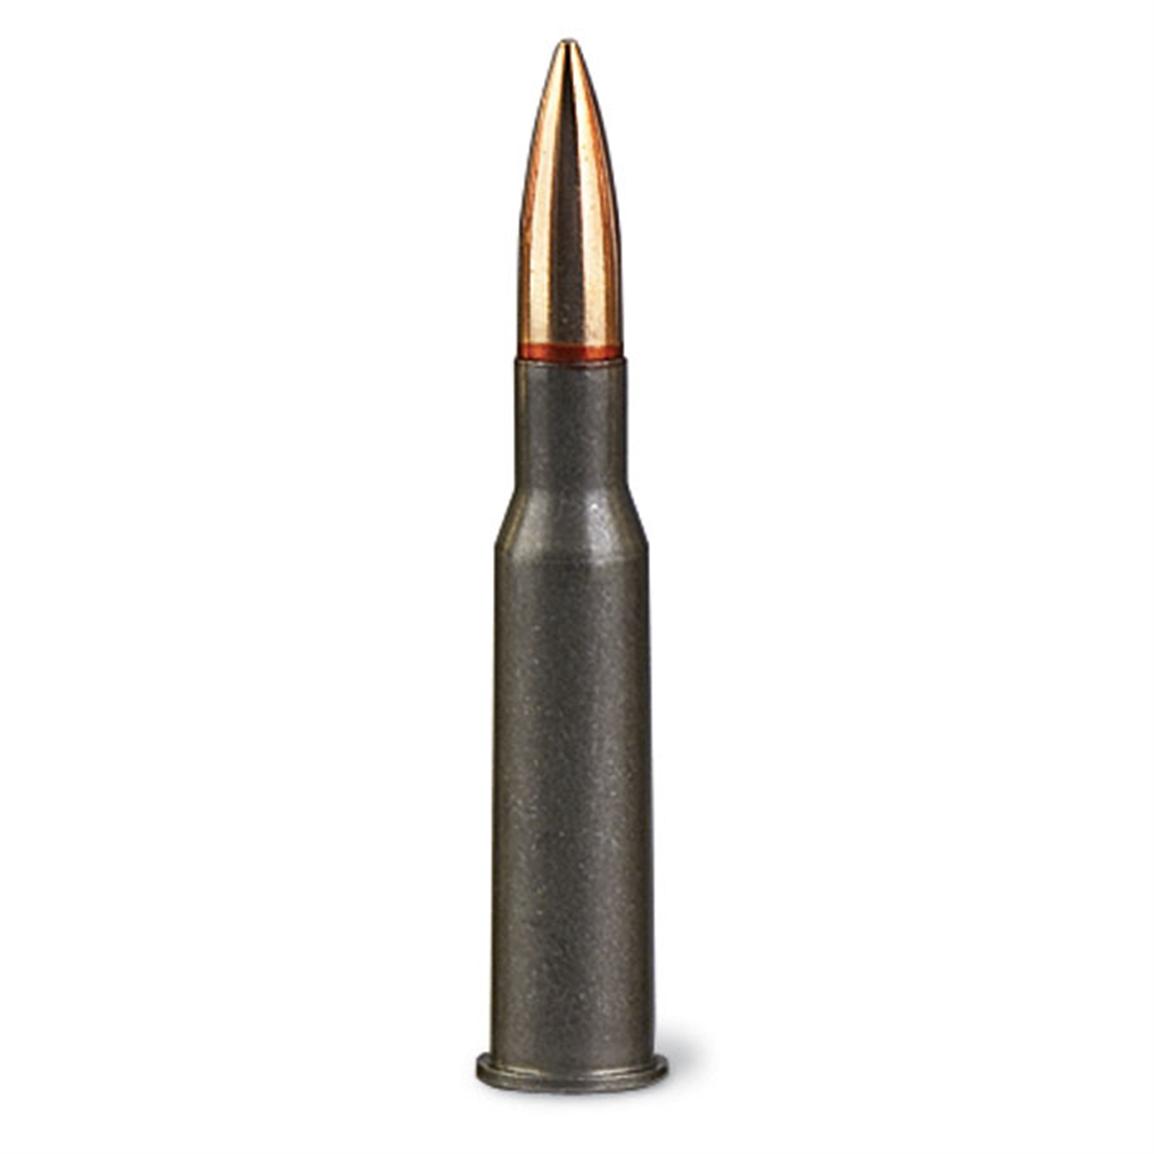 880 rds. 7.62 x 54R Ammo - 71632, 7.62x54R Ammo at Sportsman's Guide